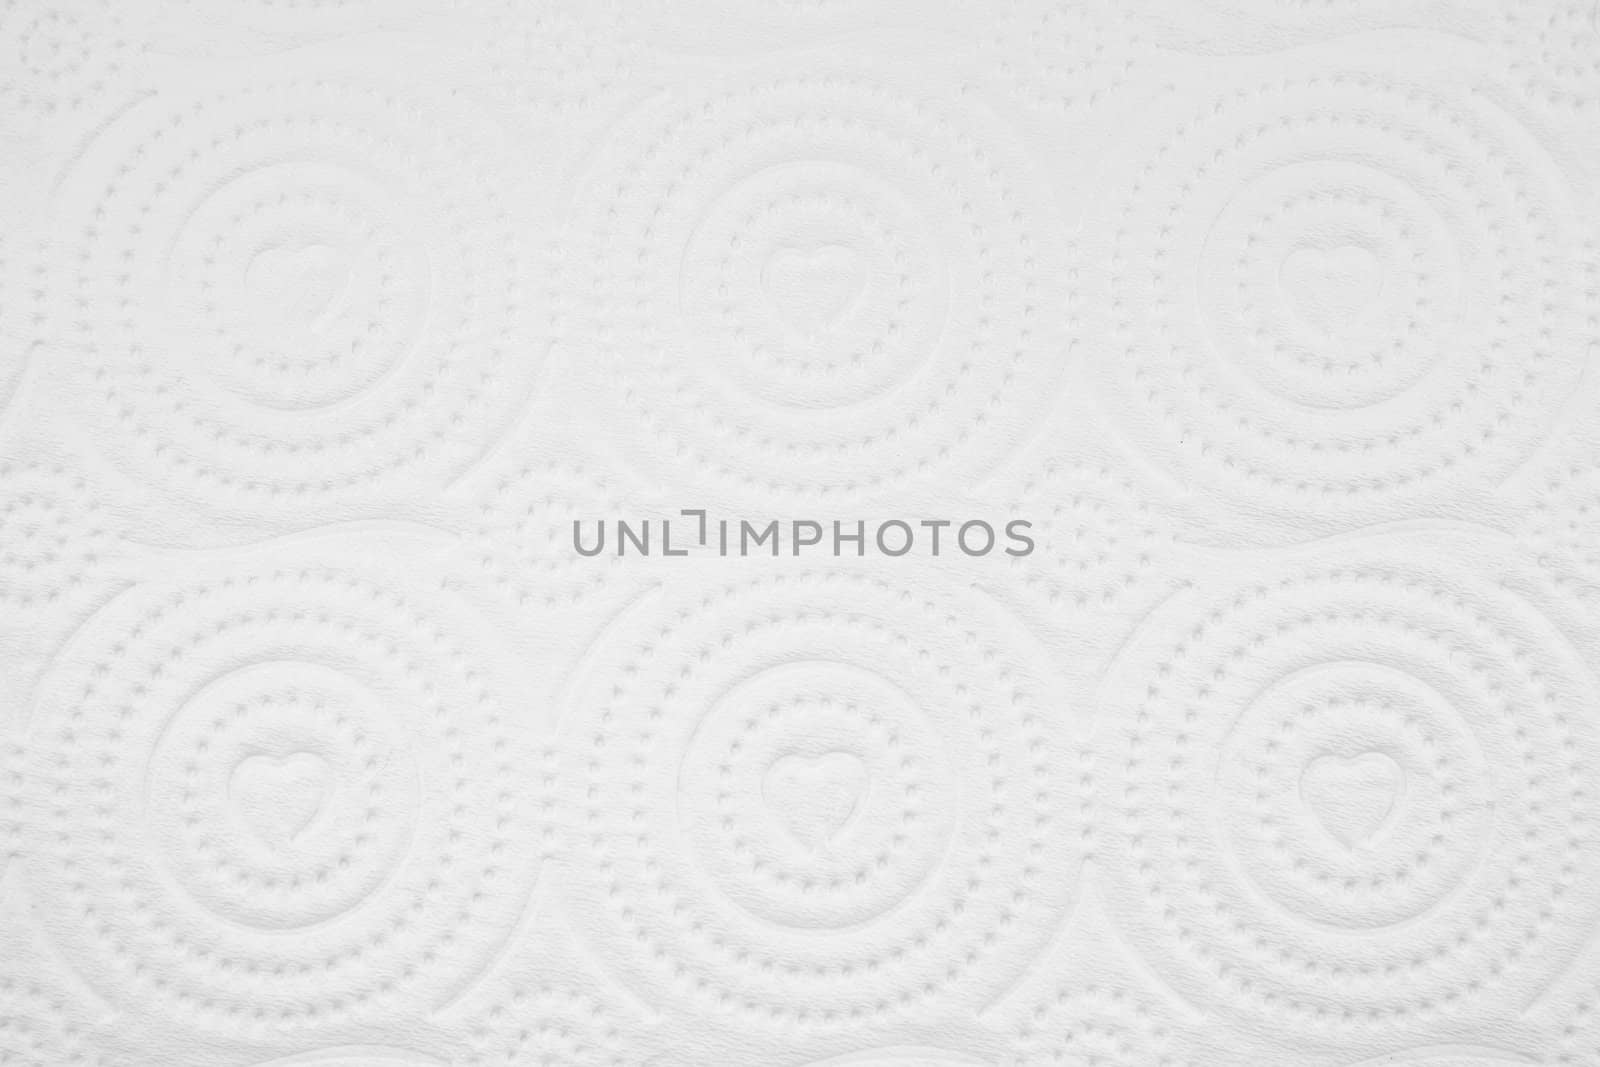 Texture of white tissue paper background